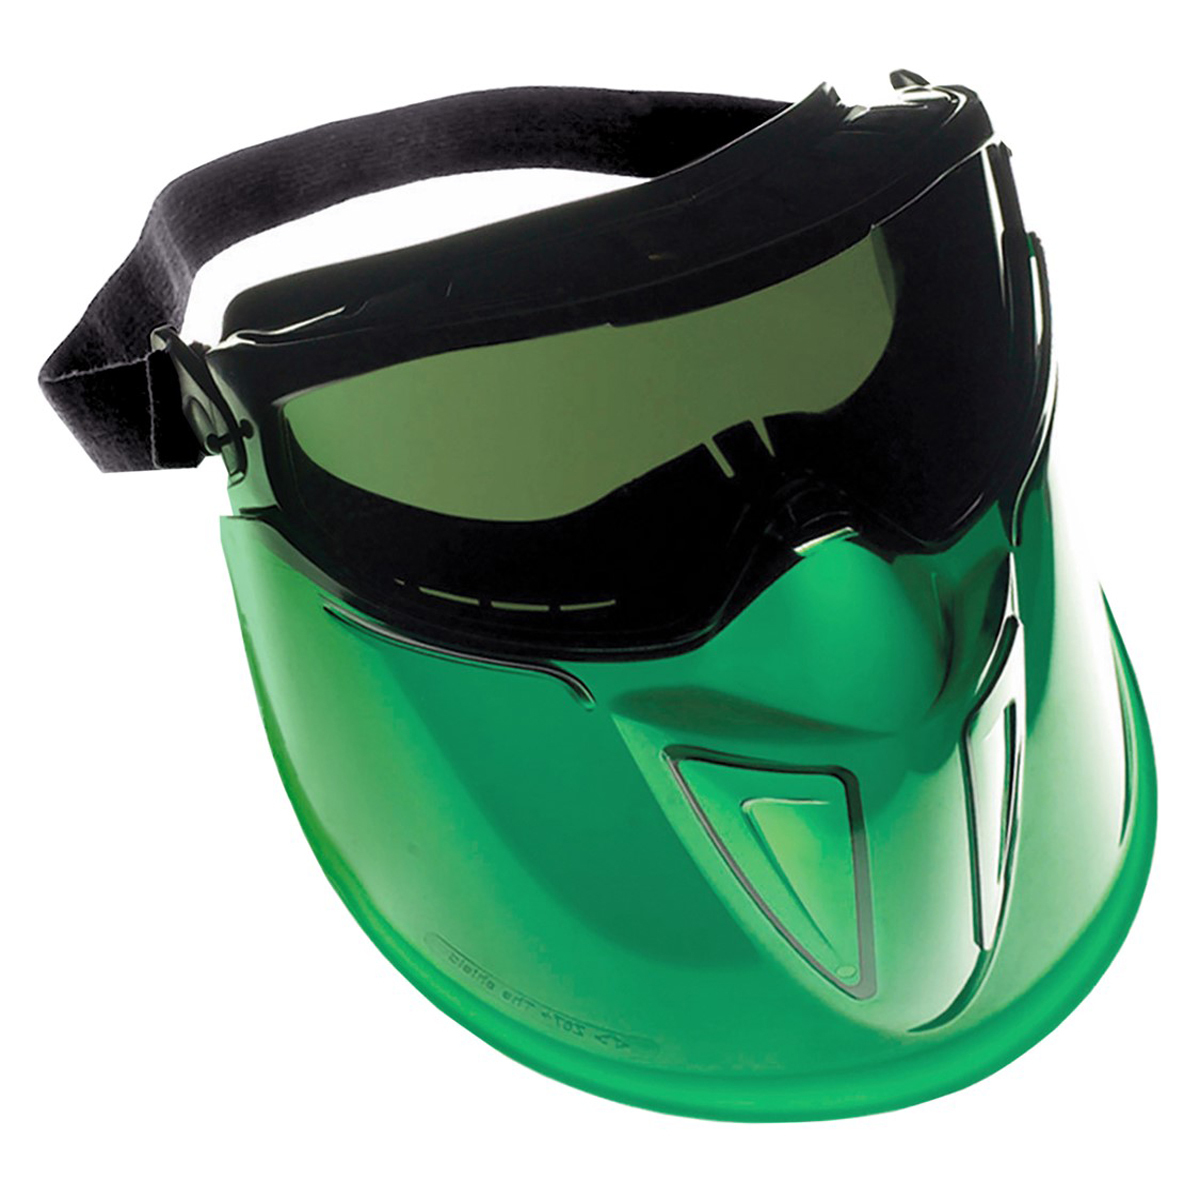 Kimberly-Clark Professional* KleenGuard™ Shield* Safety Goggles Shield* Monogoggle* XTR* Welding Goggles/Faceshield With Black A